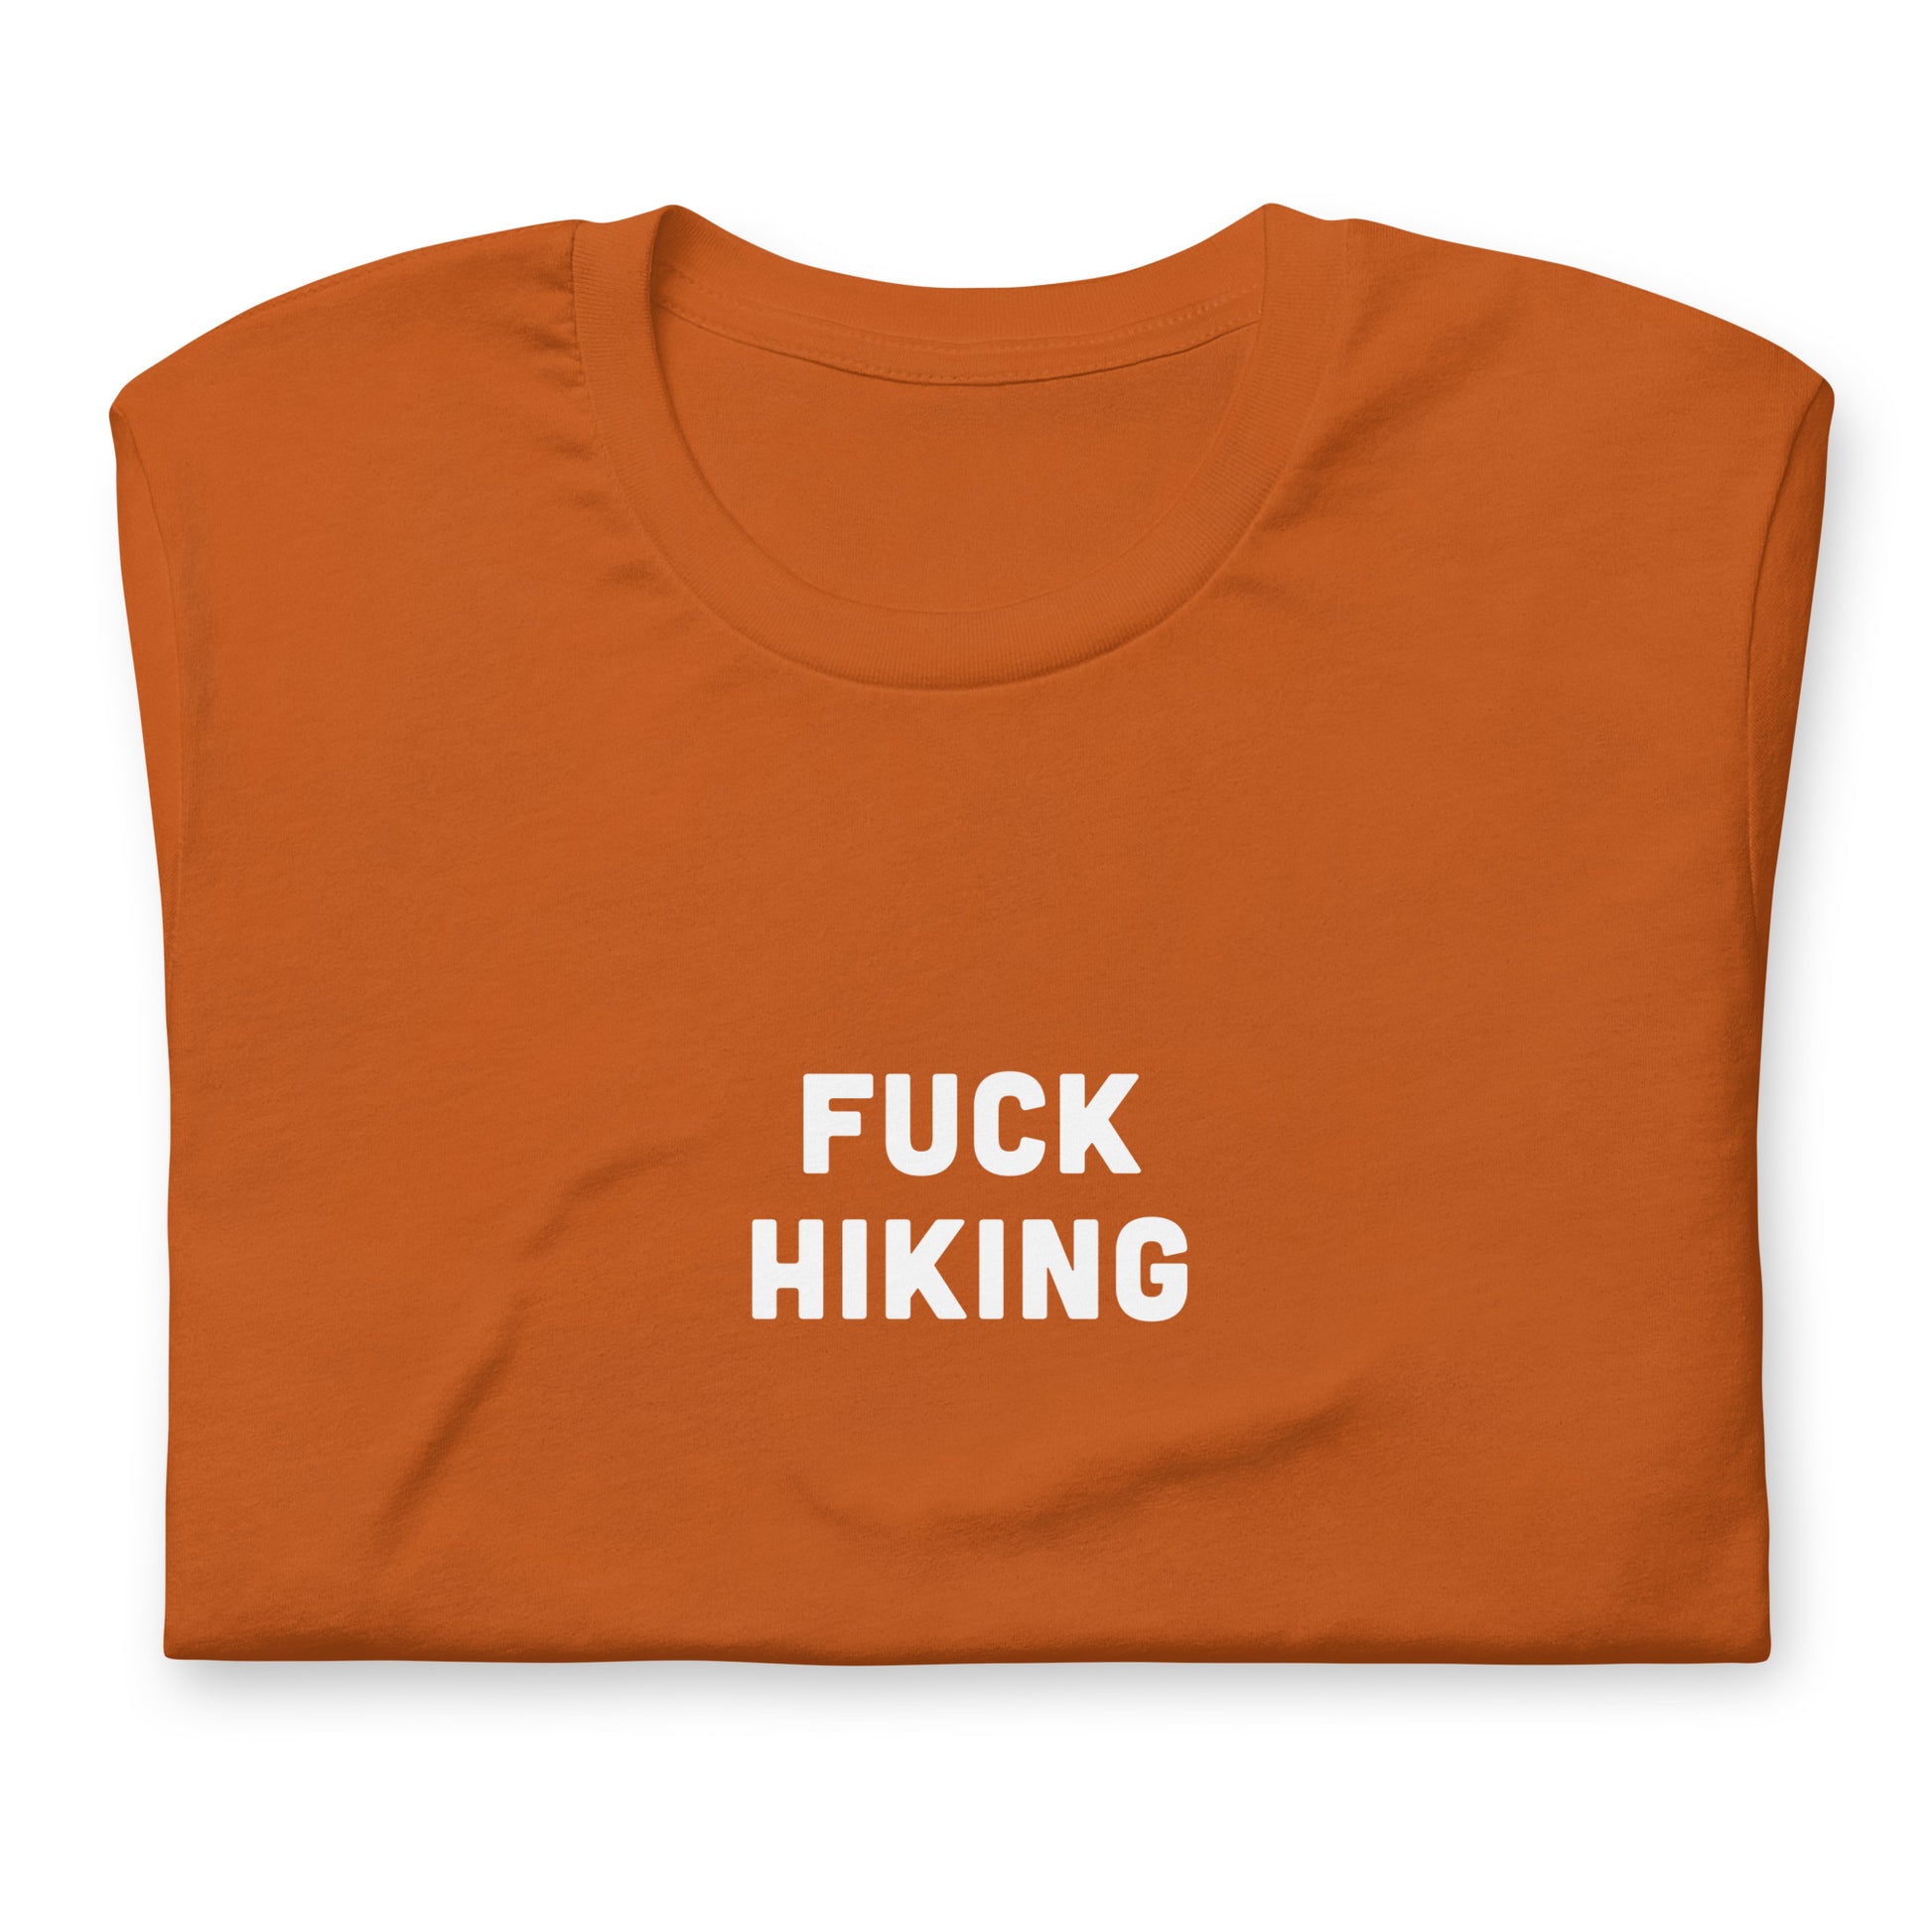 Fuck Hiking T-Shirt Size M Color Navy